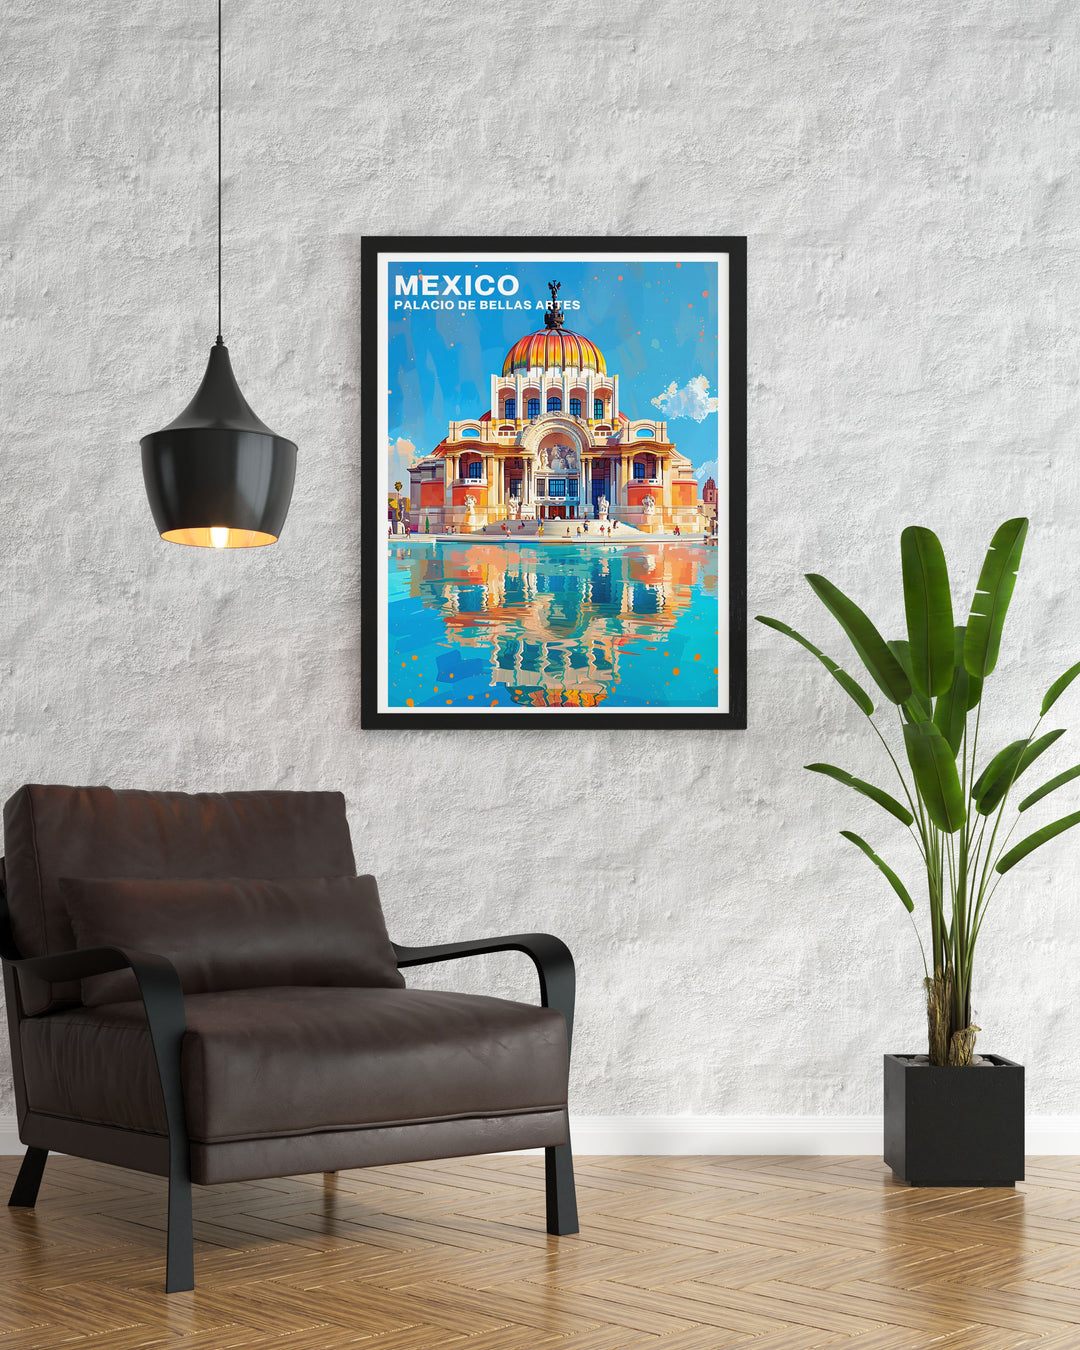 This travel poster of the Palacio de Bellas Artes captures the stunning architecture and artistic heritage of one of Mexicos most iconic landmarks, perfect for bringing cultural elegance into your home decor.